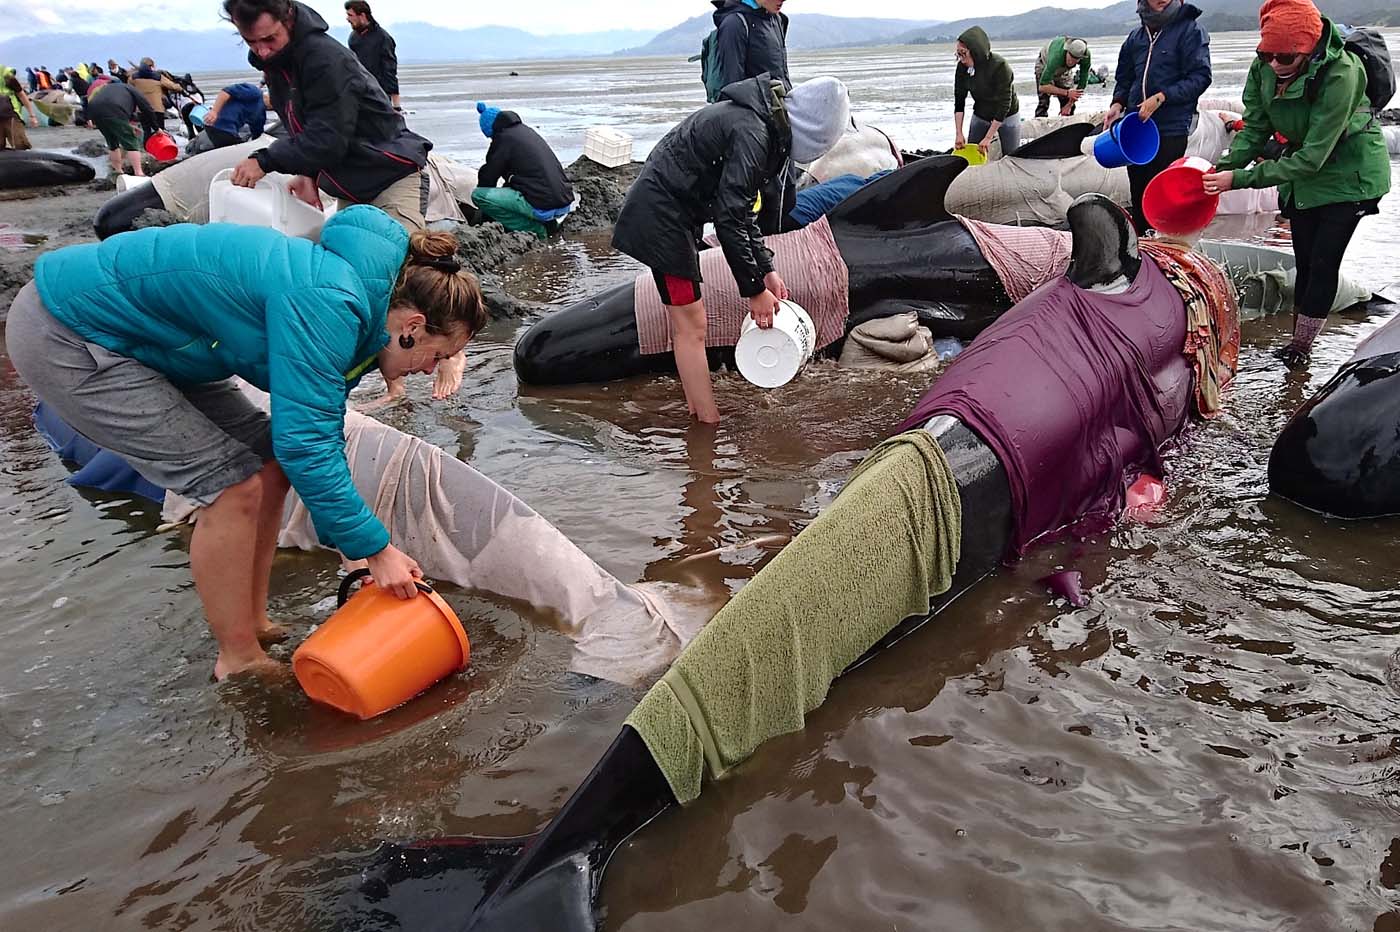 Volunteers try to keep alive some of the hundreds of stranded pilot whales after one of the country's largest recorded mass whale strandings, in Golden Bay, at the top of New Zealand's south island, February 10, 2017. REUTERS/Ross Wearing ATTENTION EDITORS - EDITORIAL USE ONLY. NO RESALES. NO ARCHIVE. NEW ZEALAND OUT. NO COMMERCIAL OR EDITORIAL SALES IN NEW ZEALAND. TPX IMAGES OF THE DAY